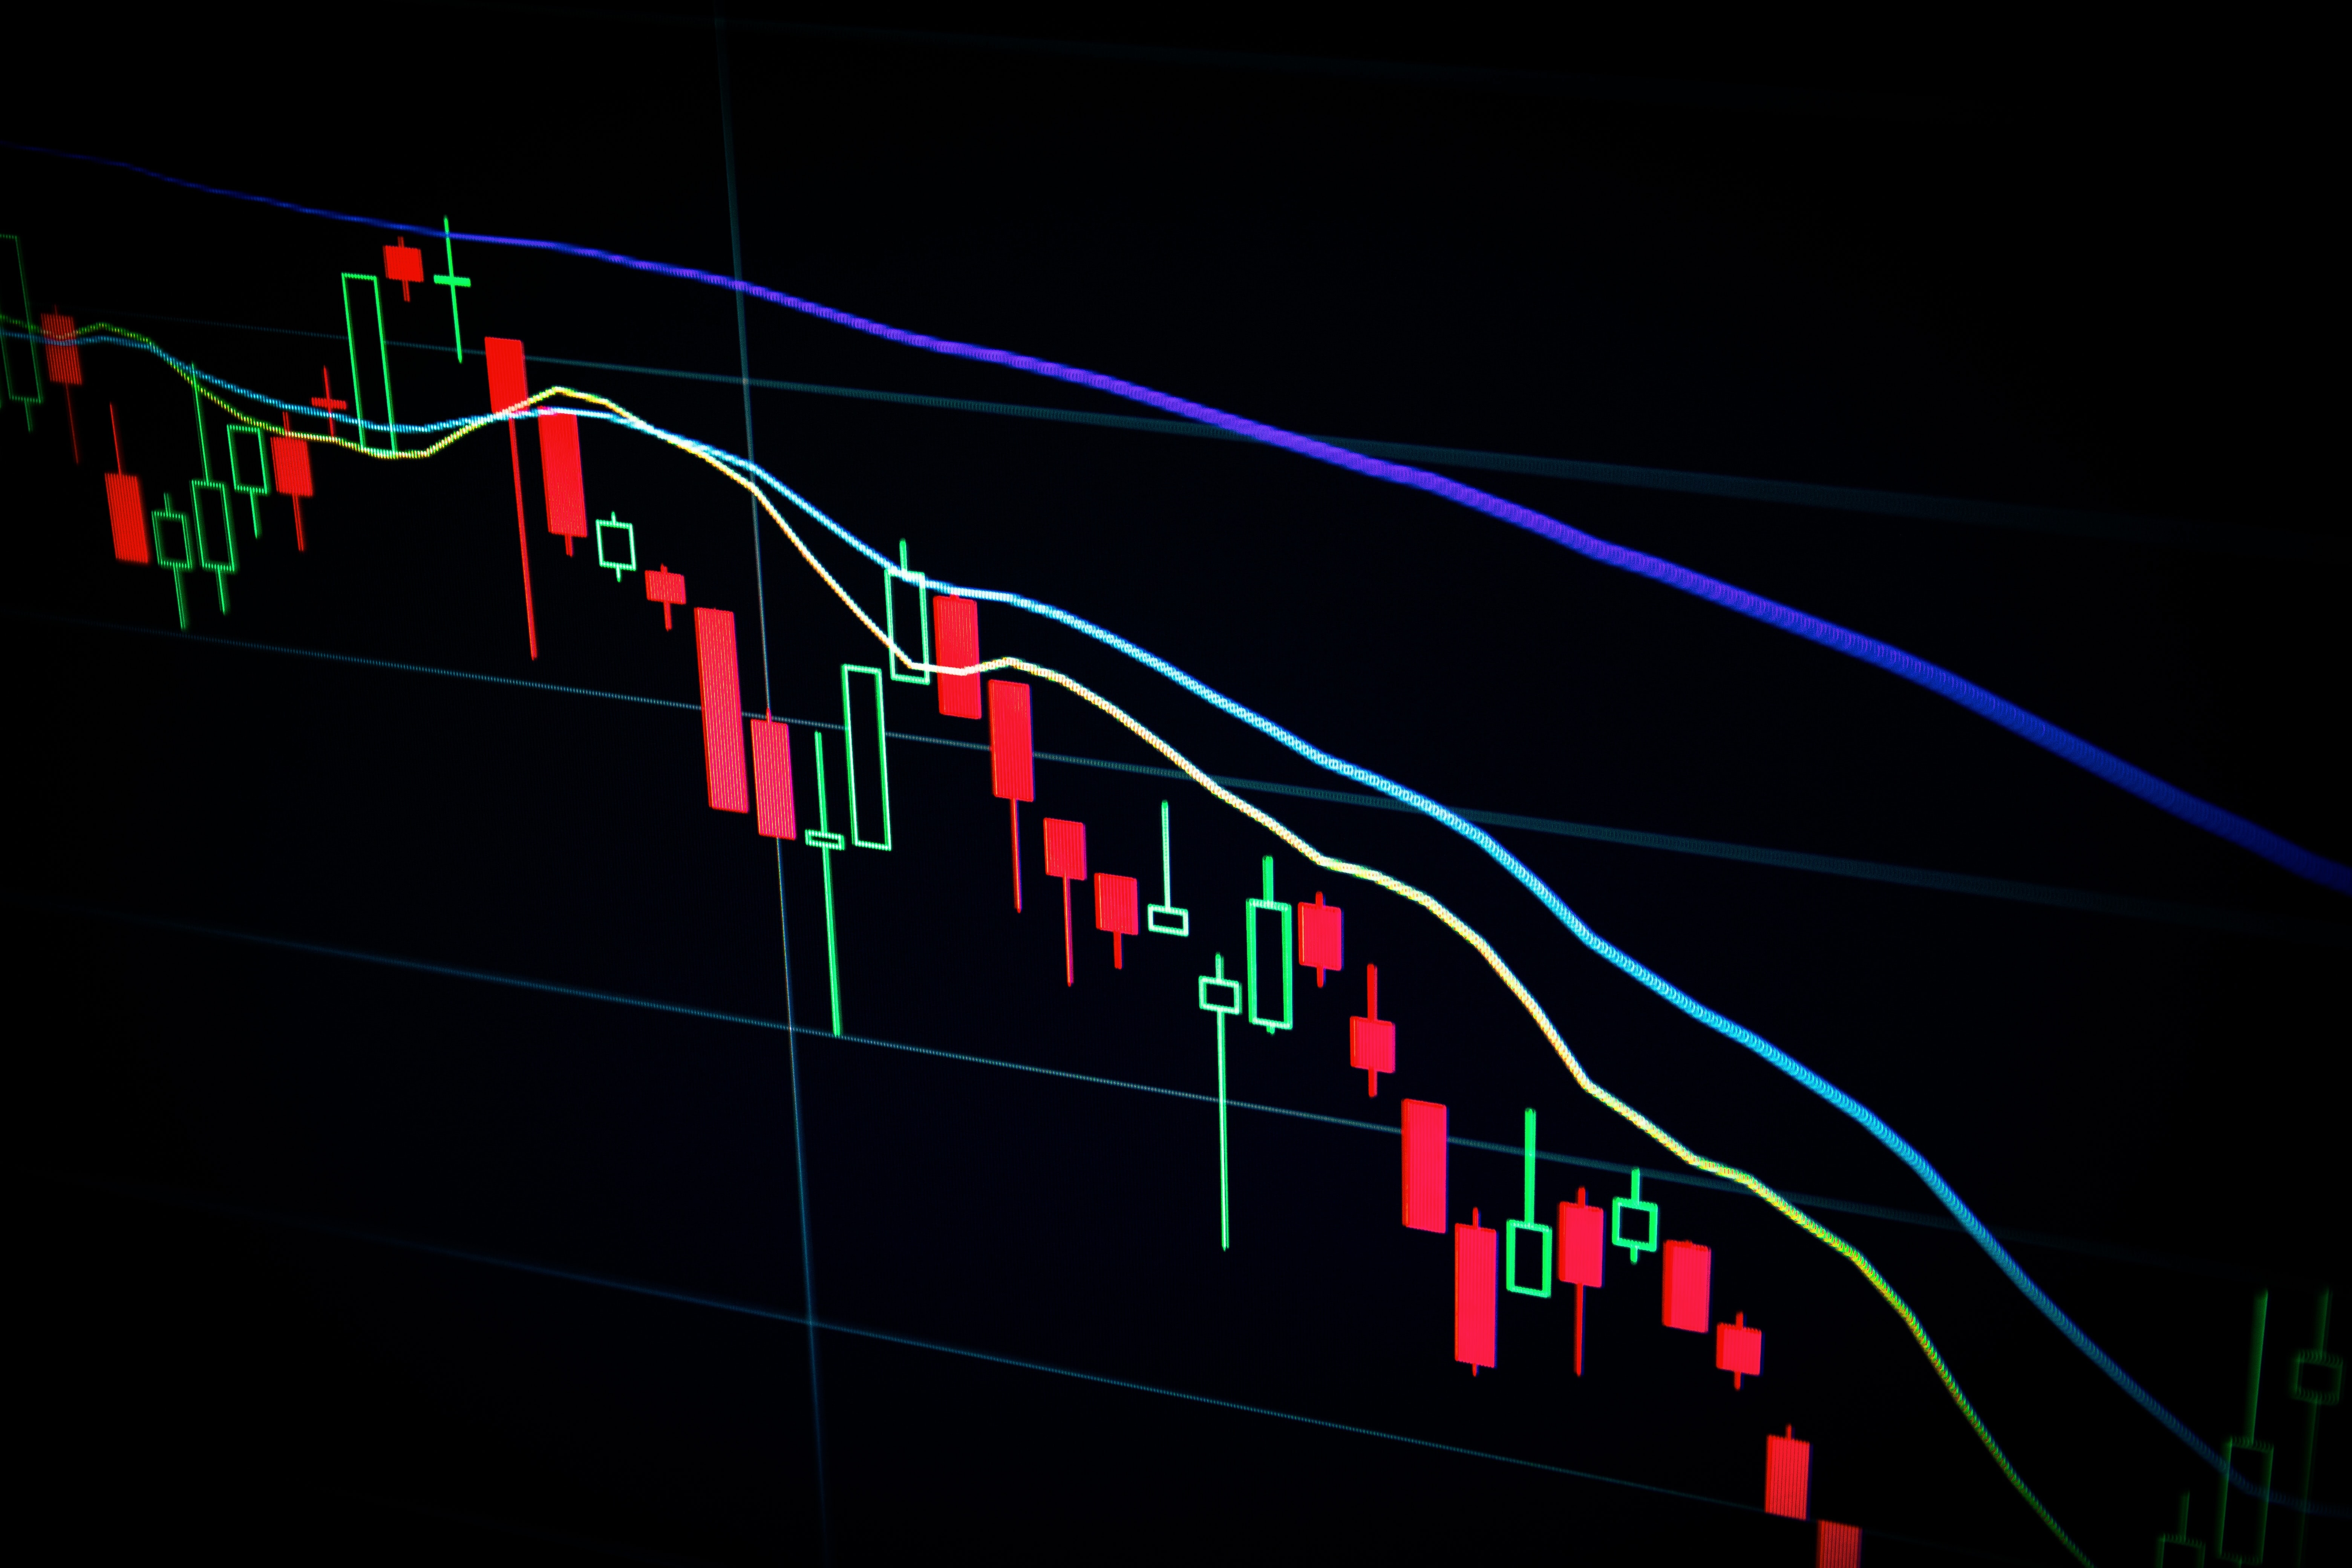 Red and green candlestick chart with black background